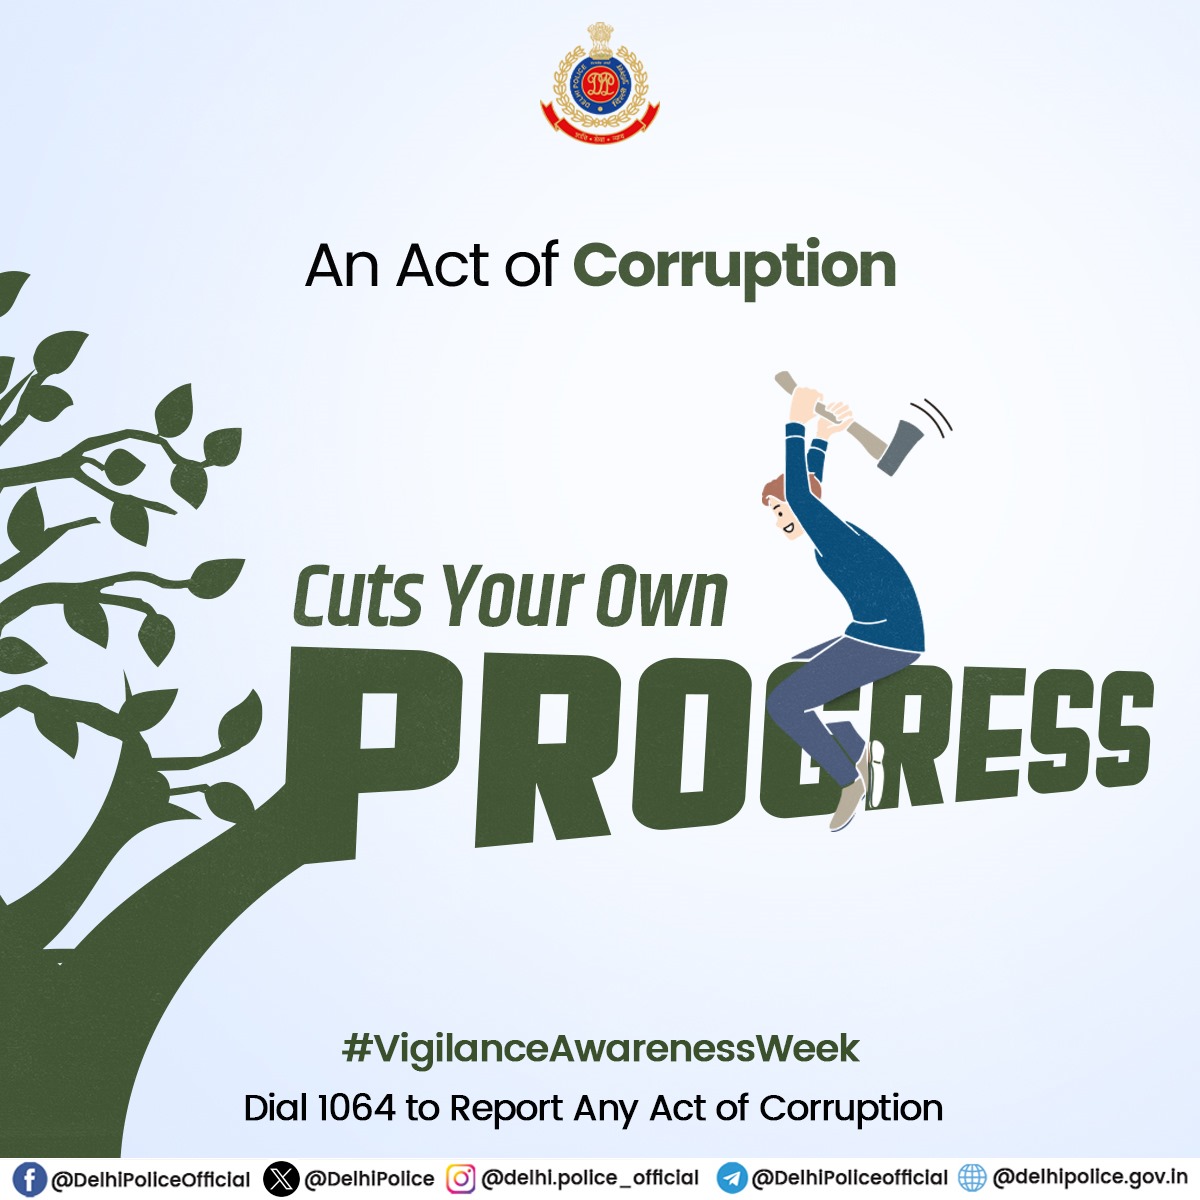 Corruption is a sin that drags progress down. Raise voice against corruption.

To report any act of corruption dial 1064.

@CVCIndia

#EndCorruption 
#VigilanceAwarenessWeek
#SayNoToCorruption